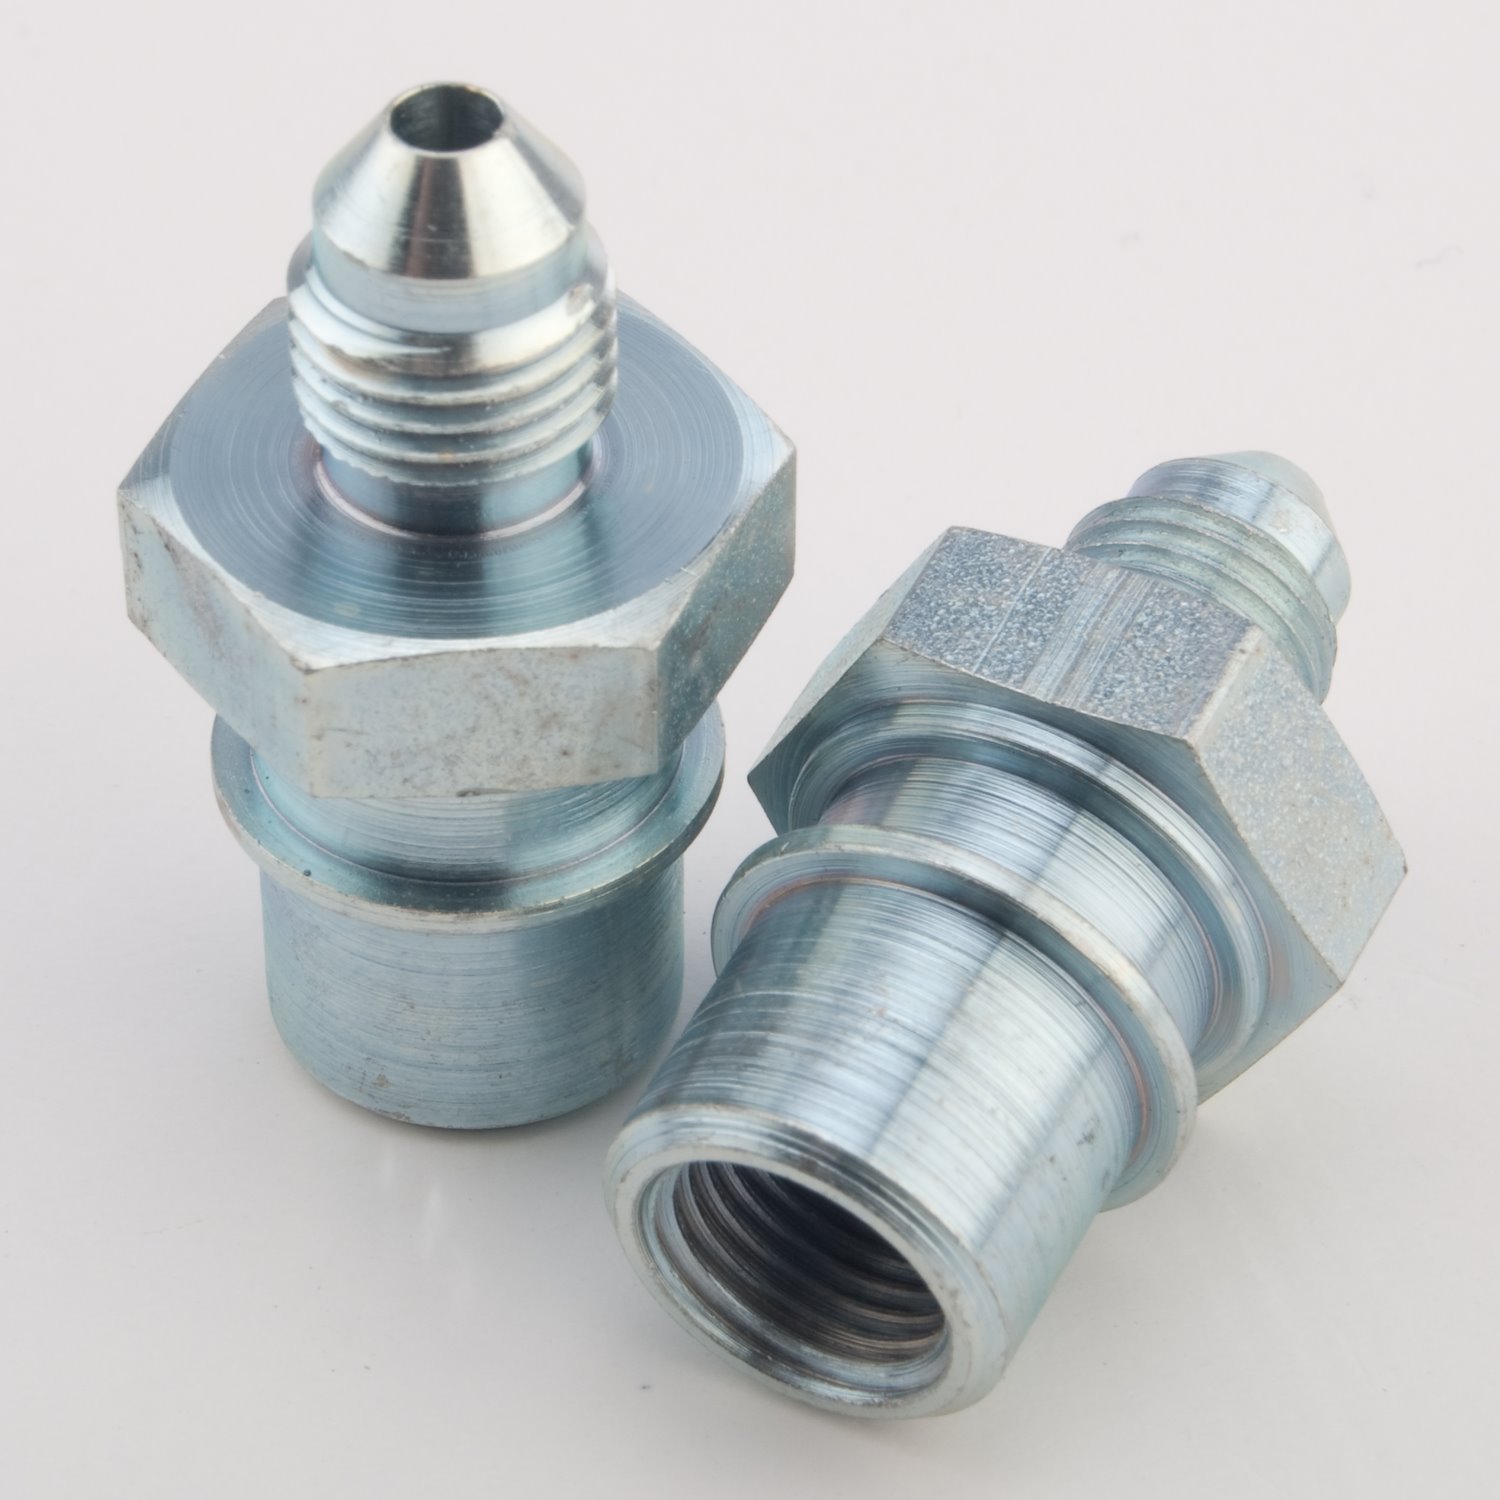 AN to Bubble Flare Female Tube Adapter Fittings [-3 AN x 10mm x 1.0]